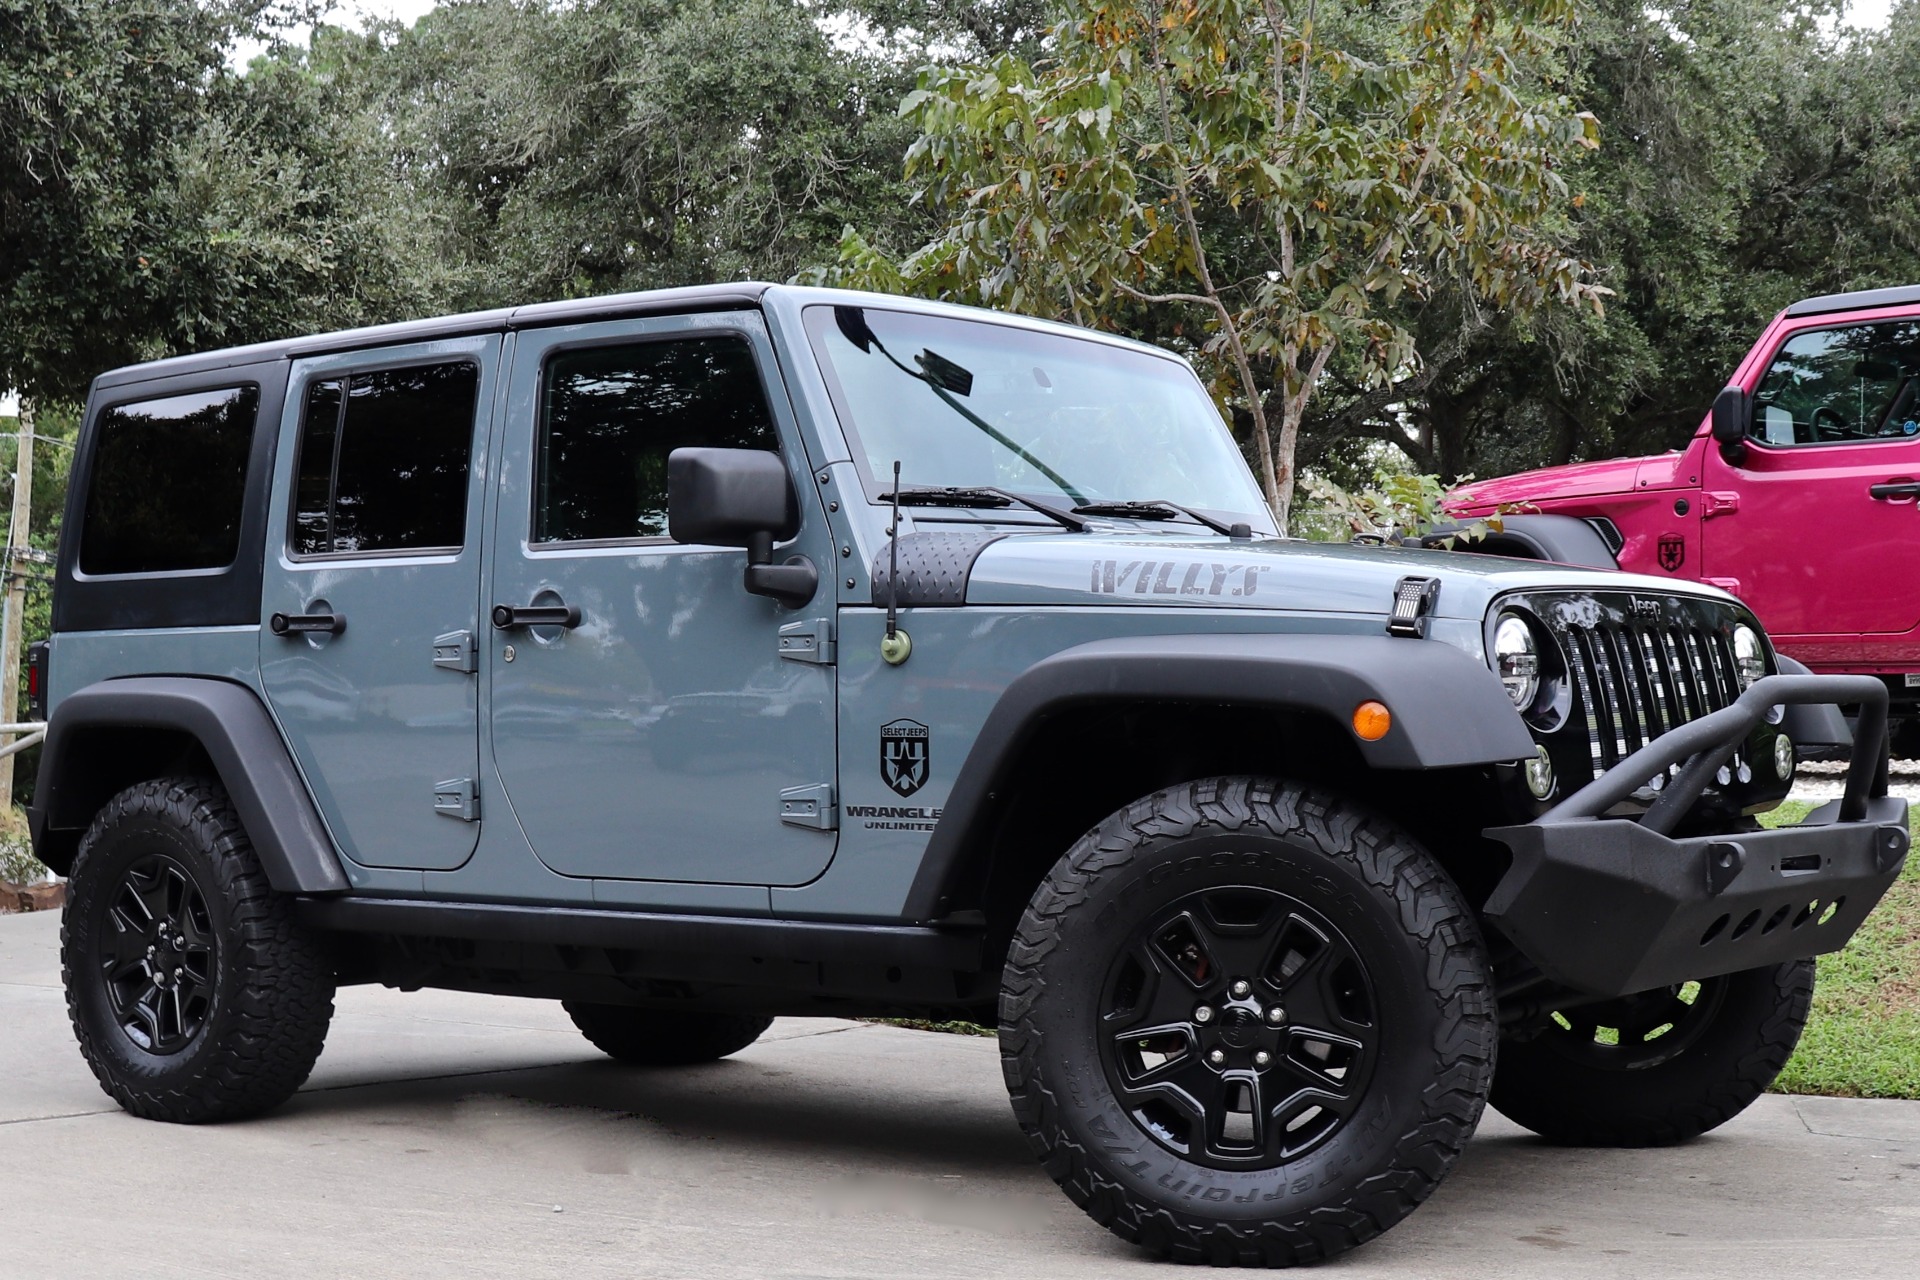 Used-2014-Jeep-Wrangler-Unlimited-Freedom-Edition